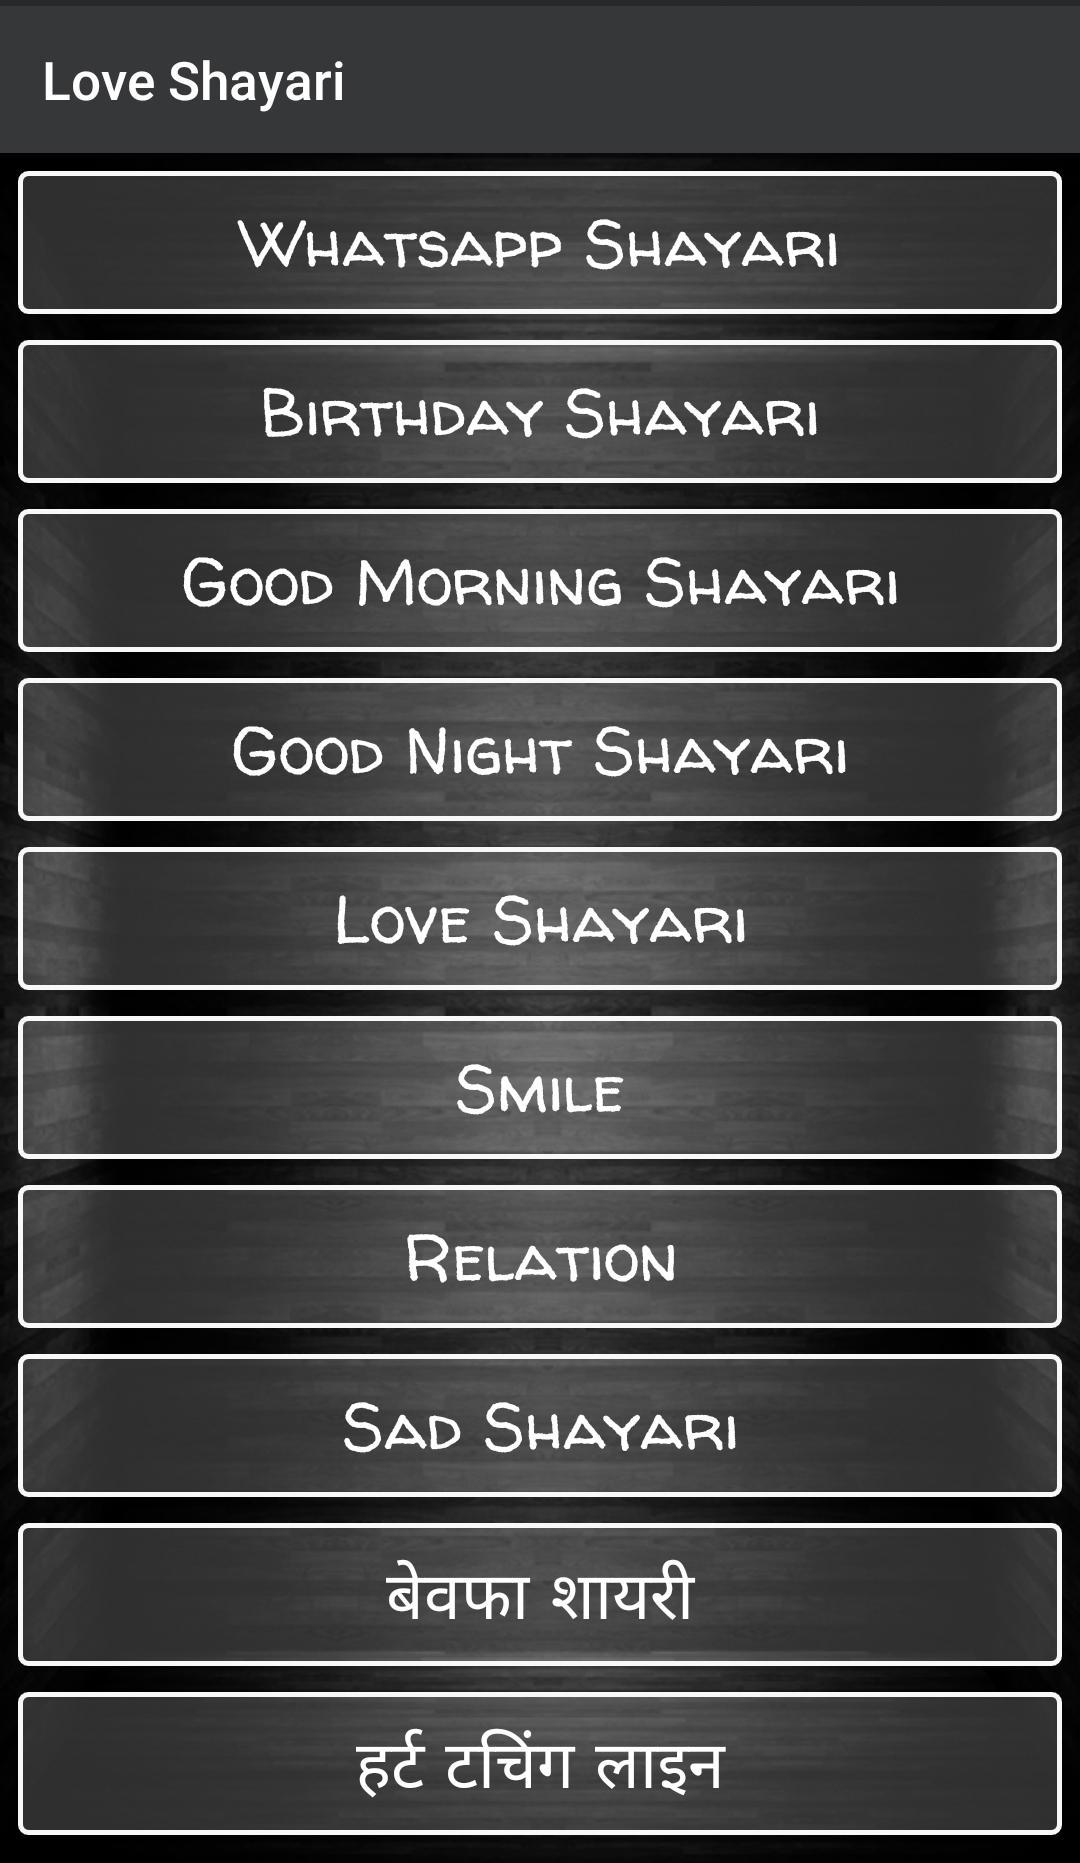 Love Shayari Sms And Quotes For Android Apk Download